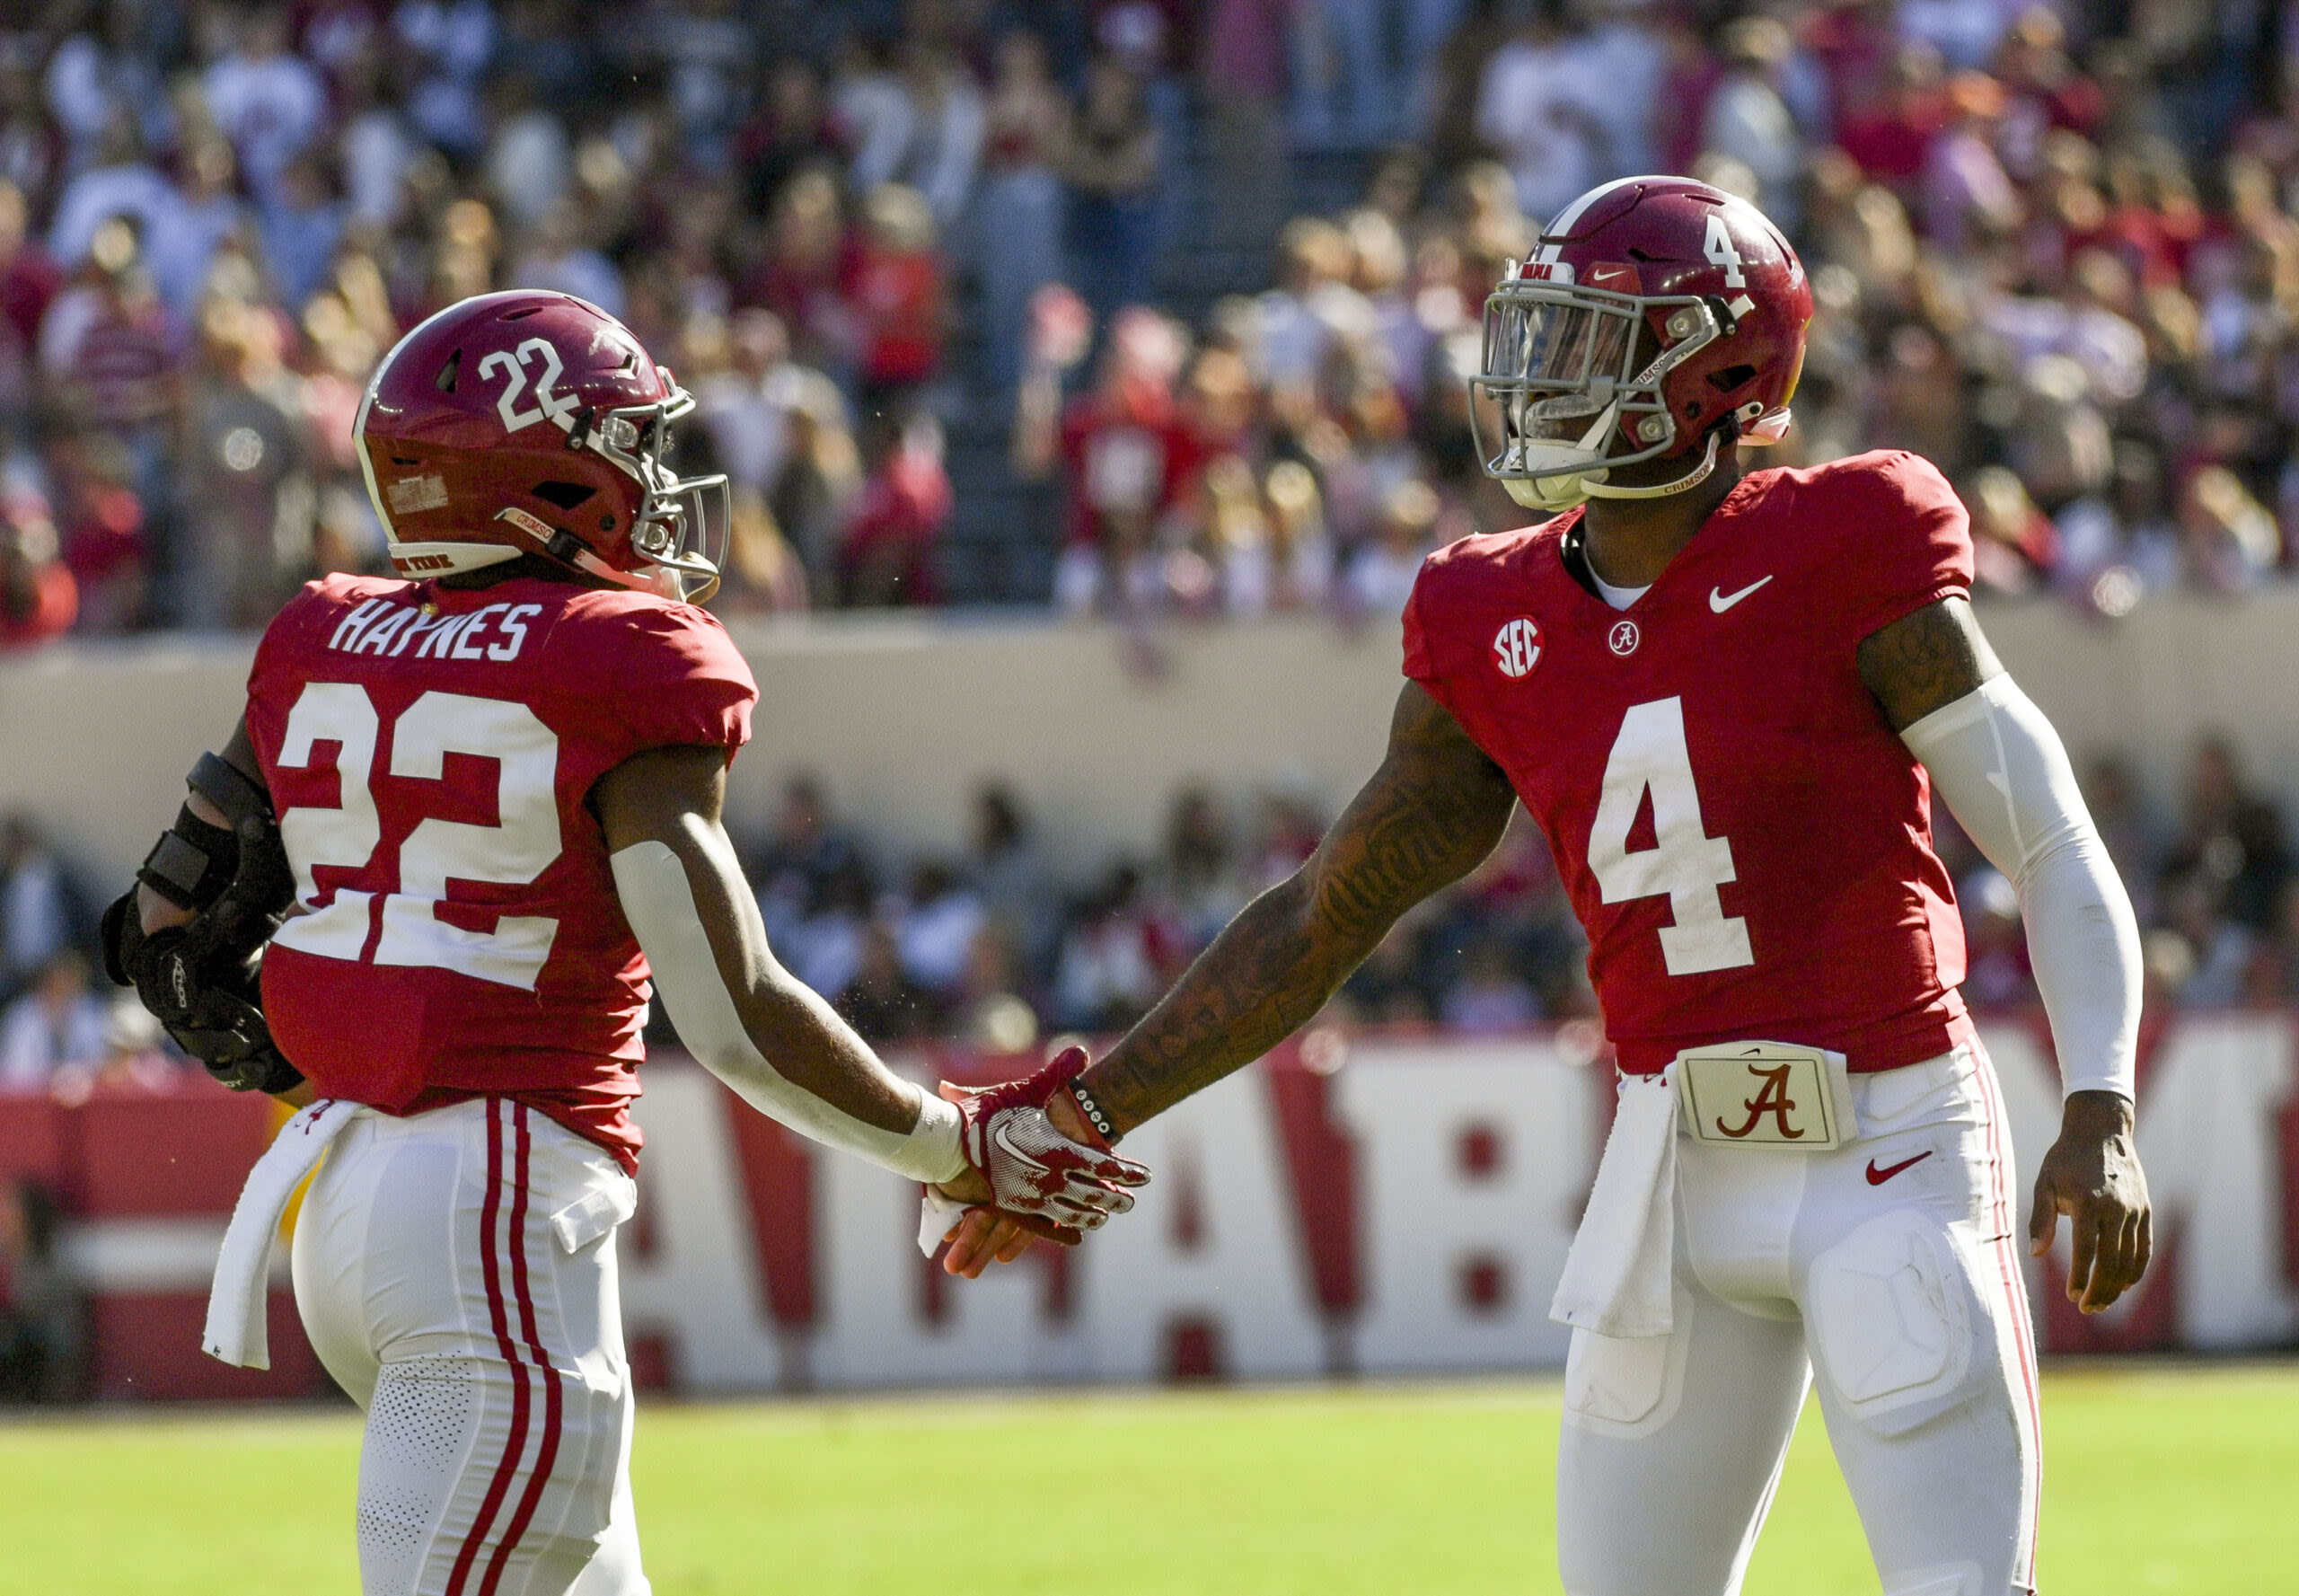 Where does Alabama rank in the post-spring college football power rankings?